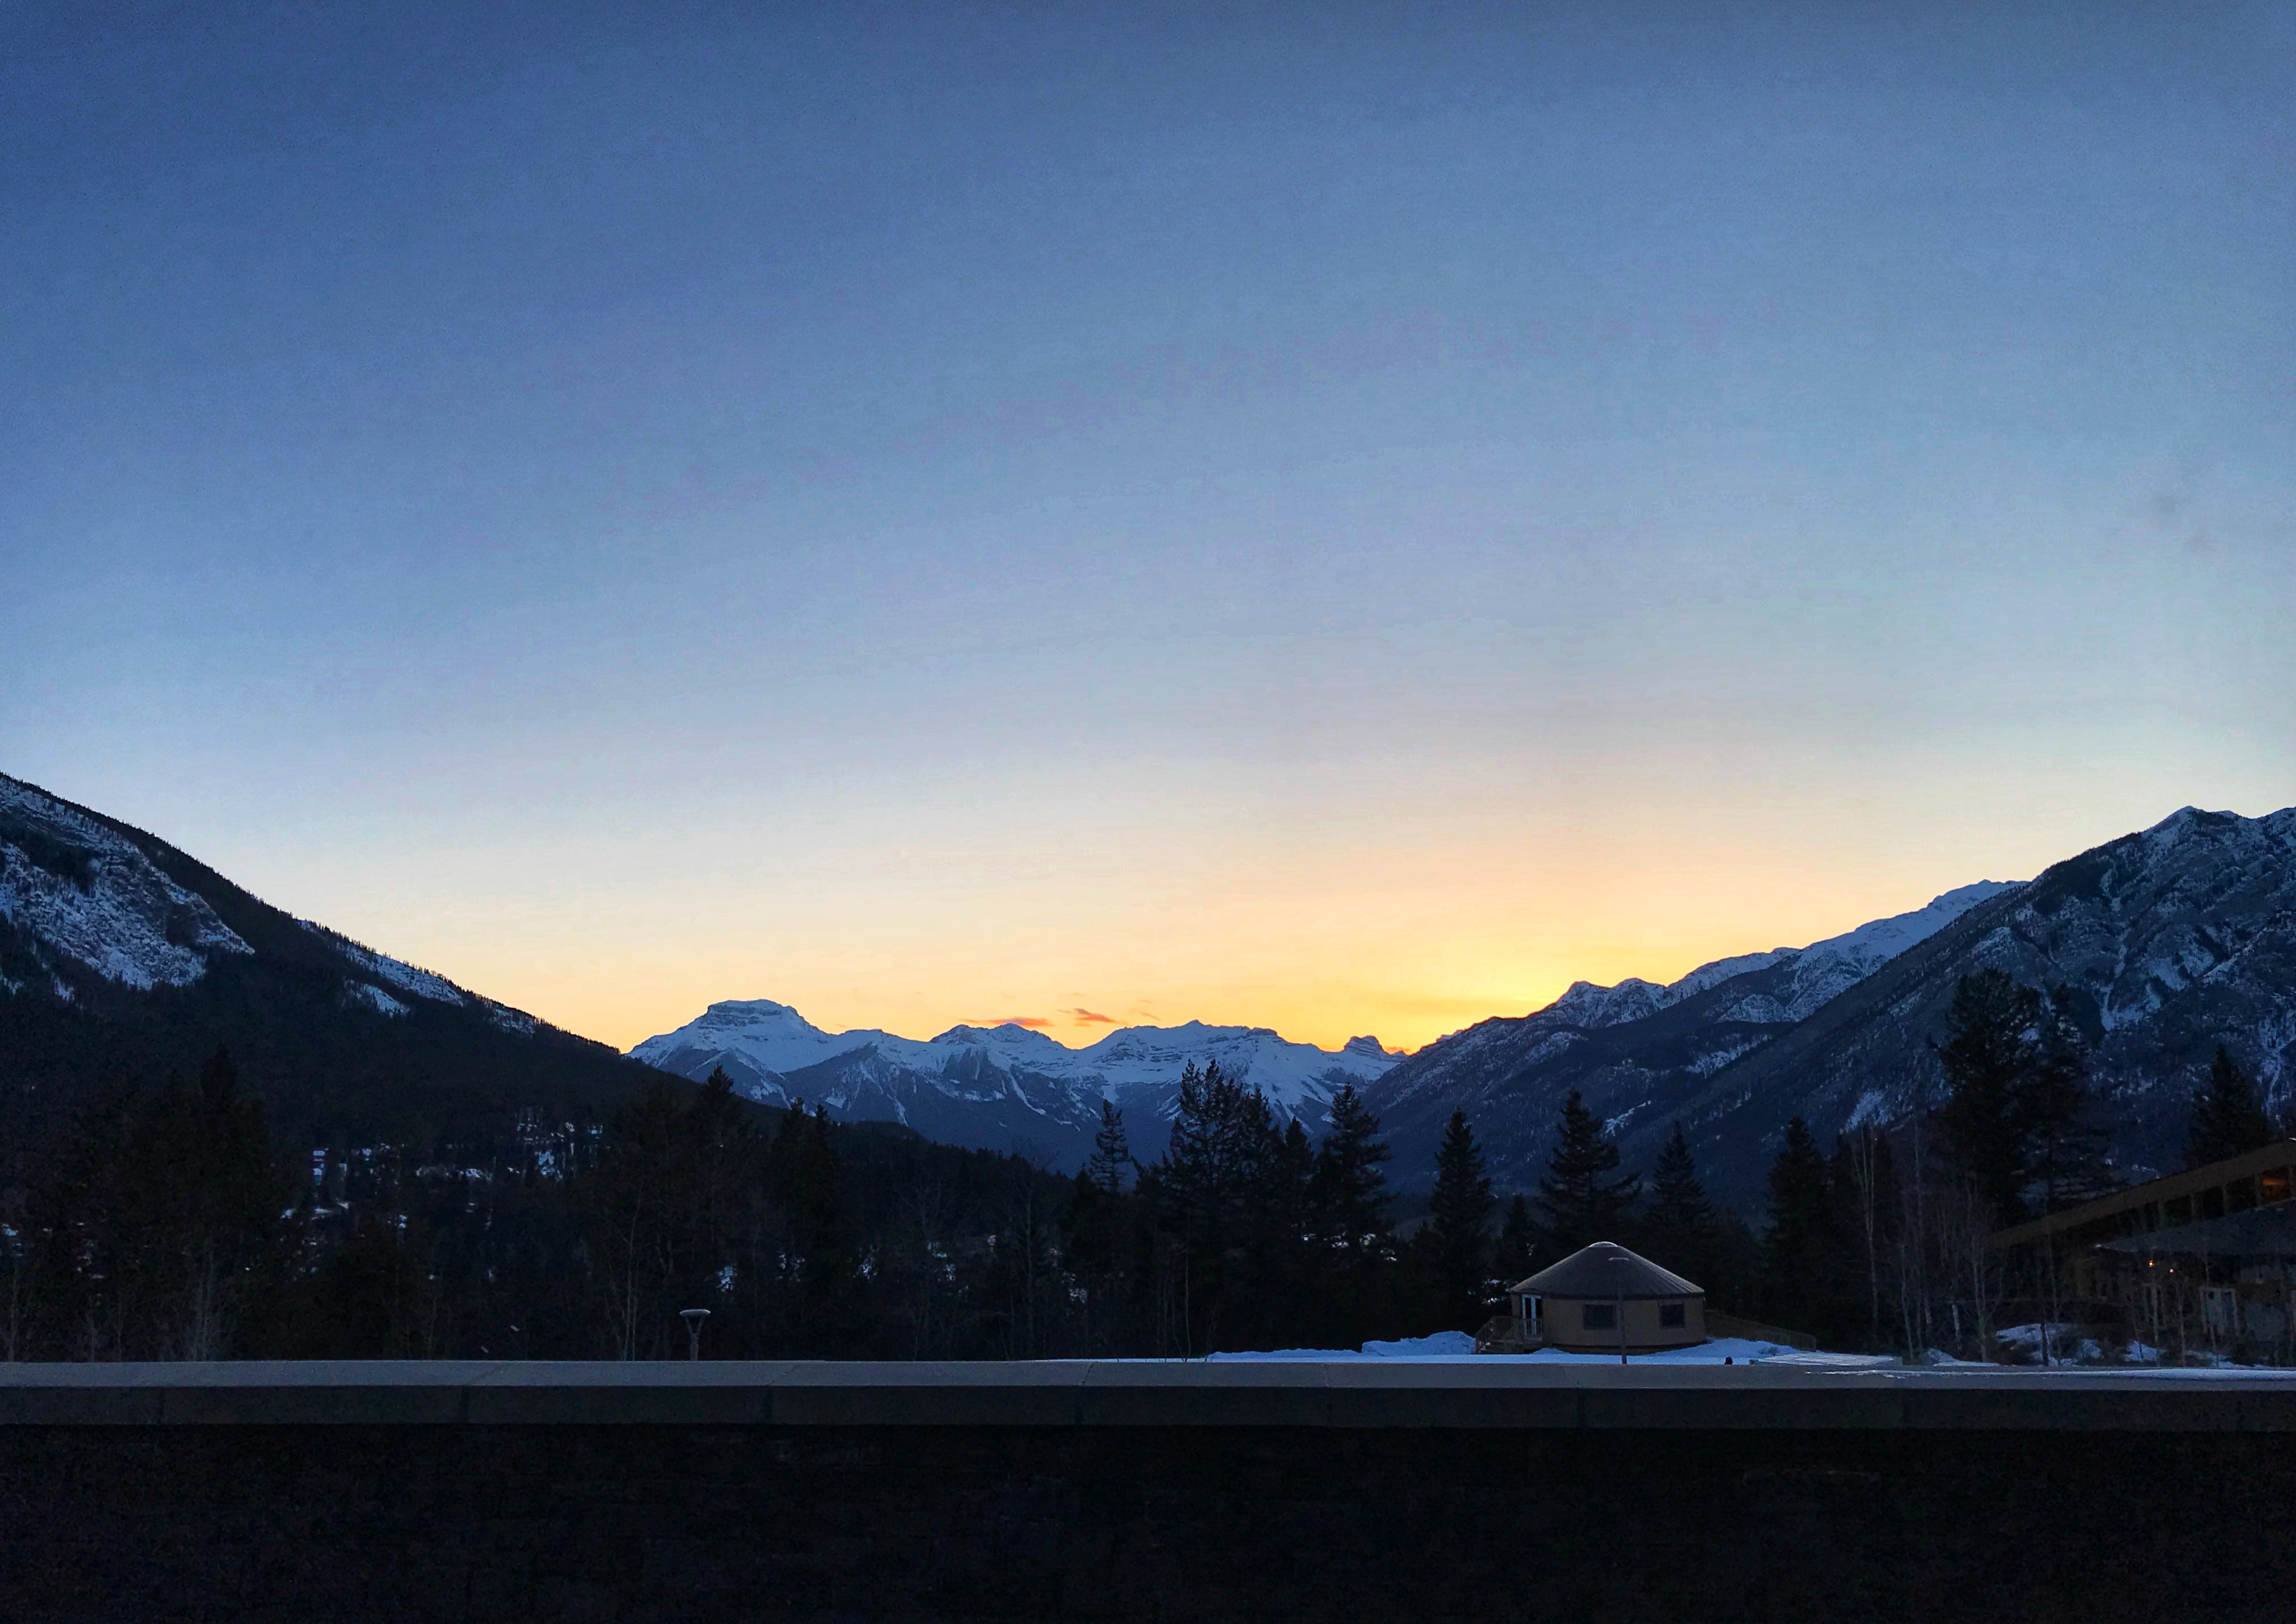 Sunset over the mountains as seen from the Banff Centre